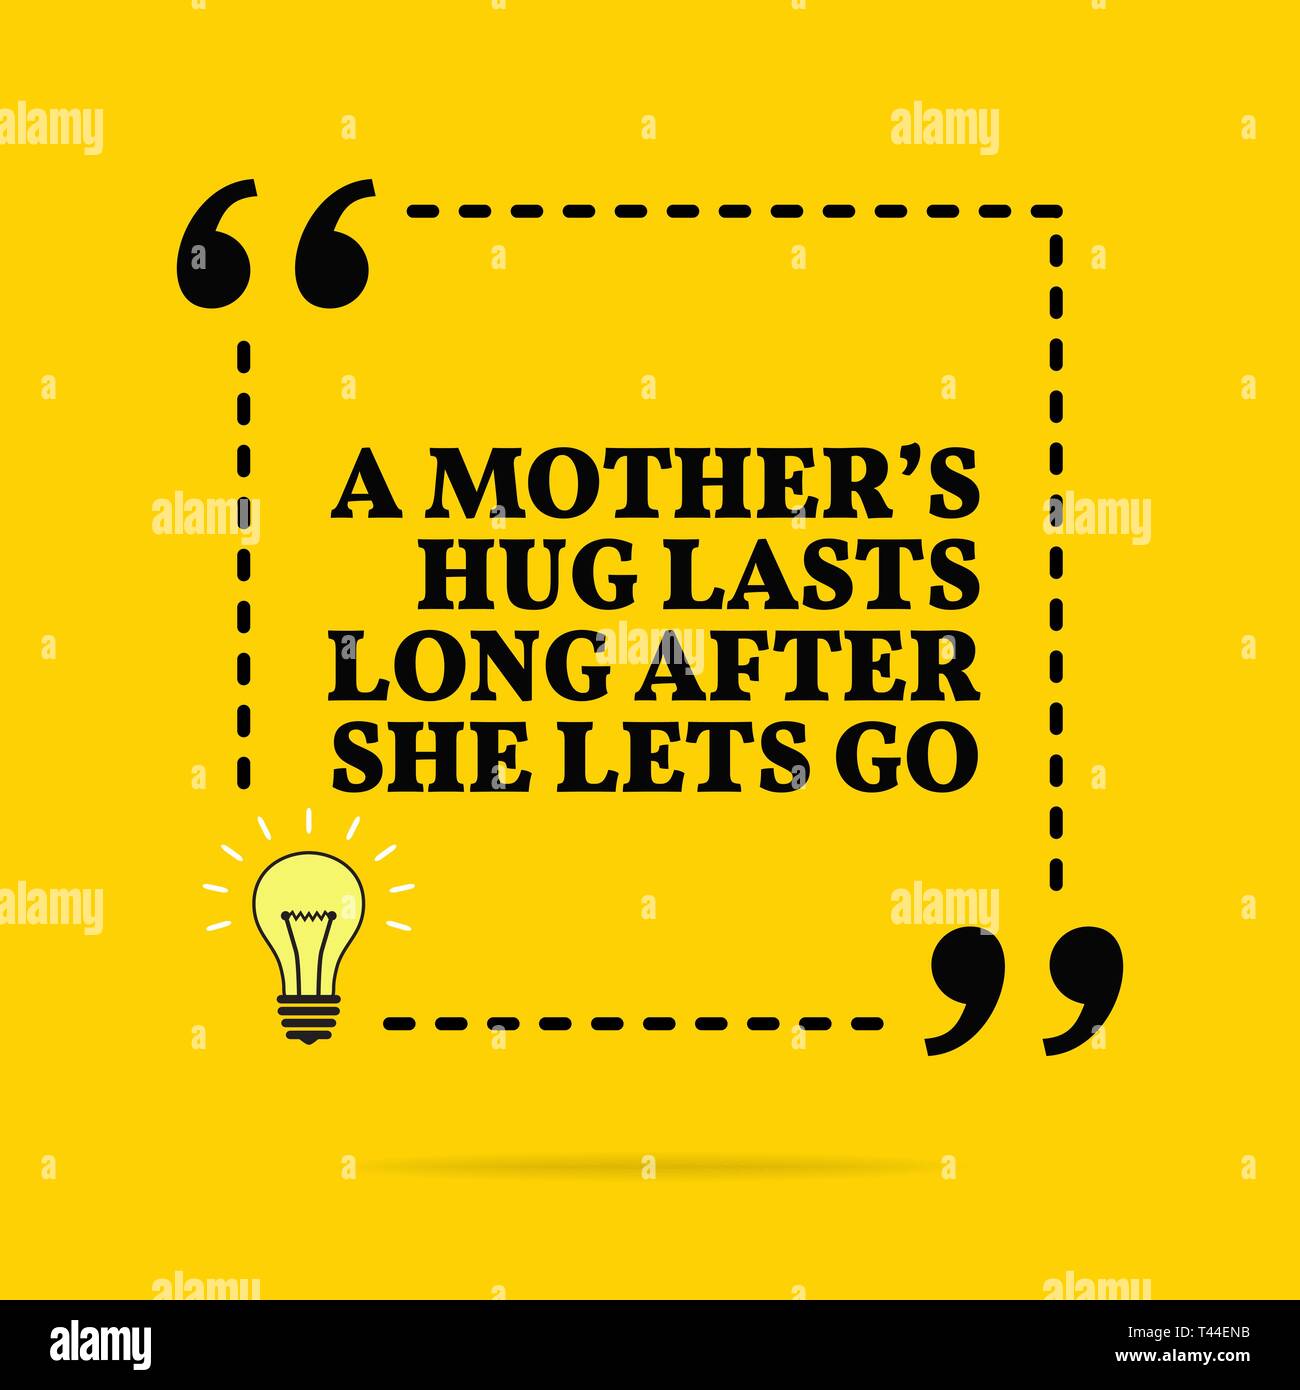 Inspirational Motivational Quote A Mother S Hug Lasts Long After She Lets Go Vector Simple